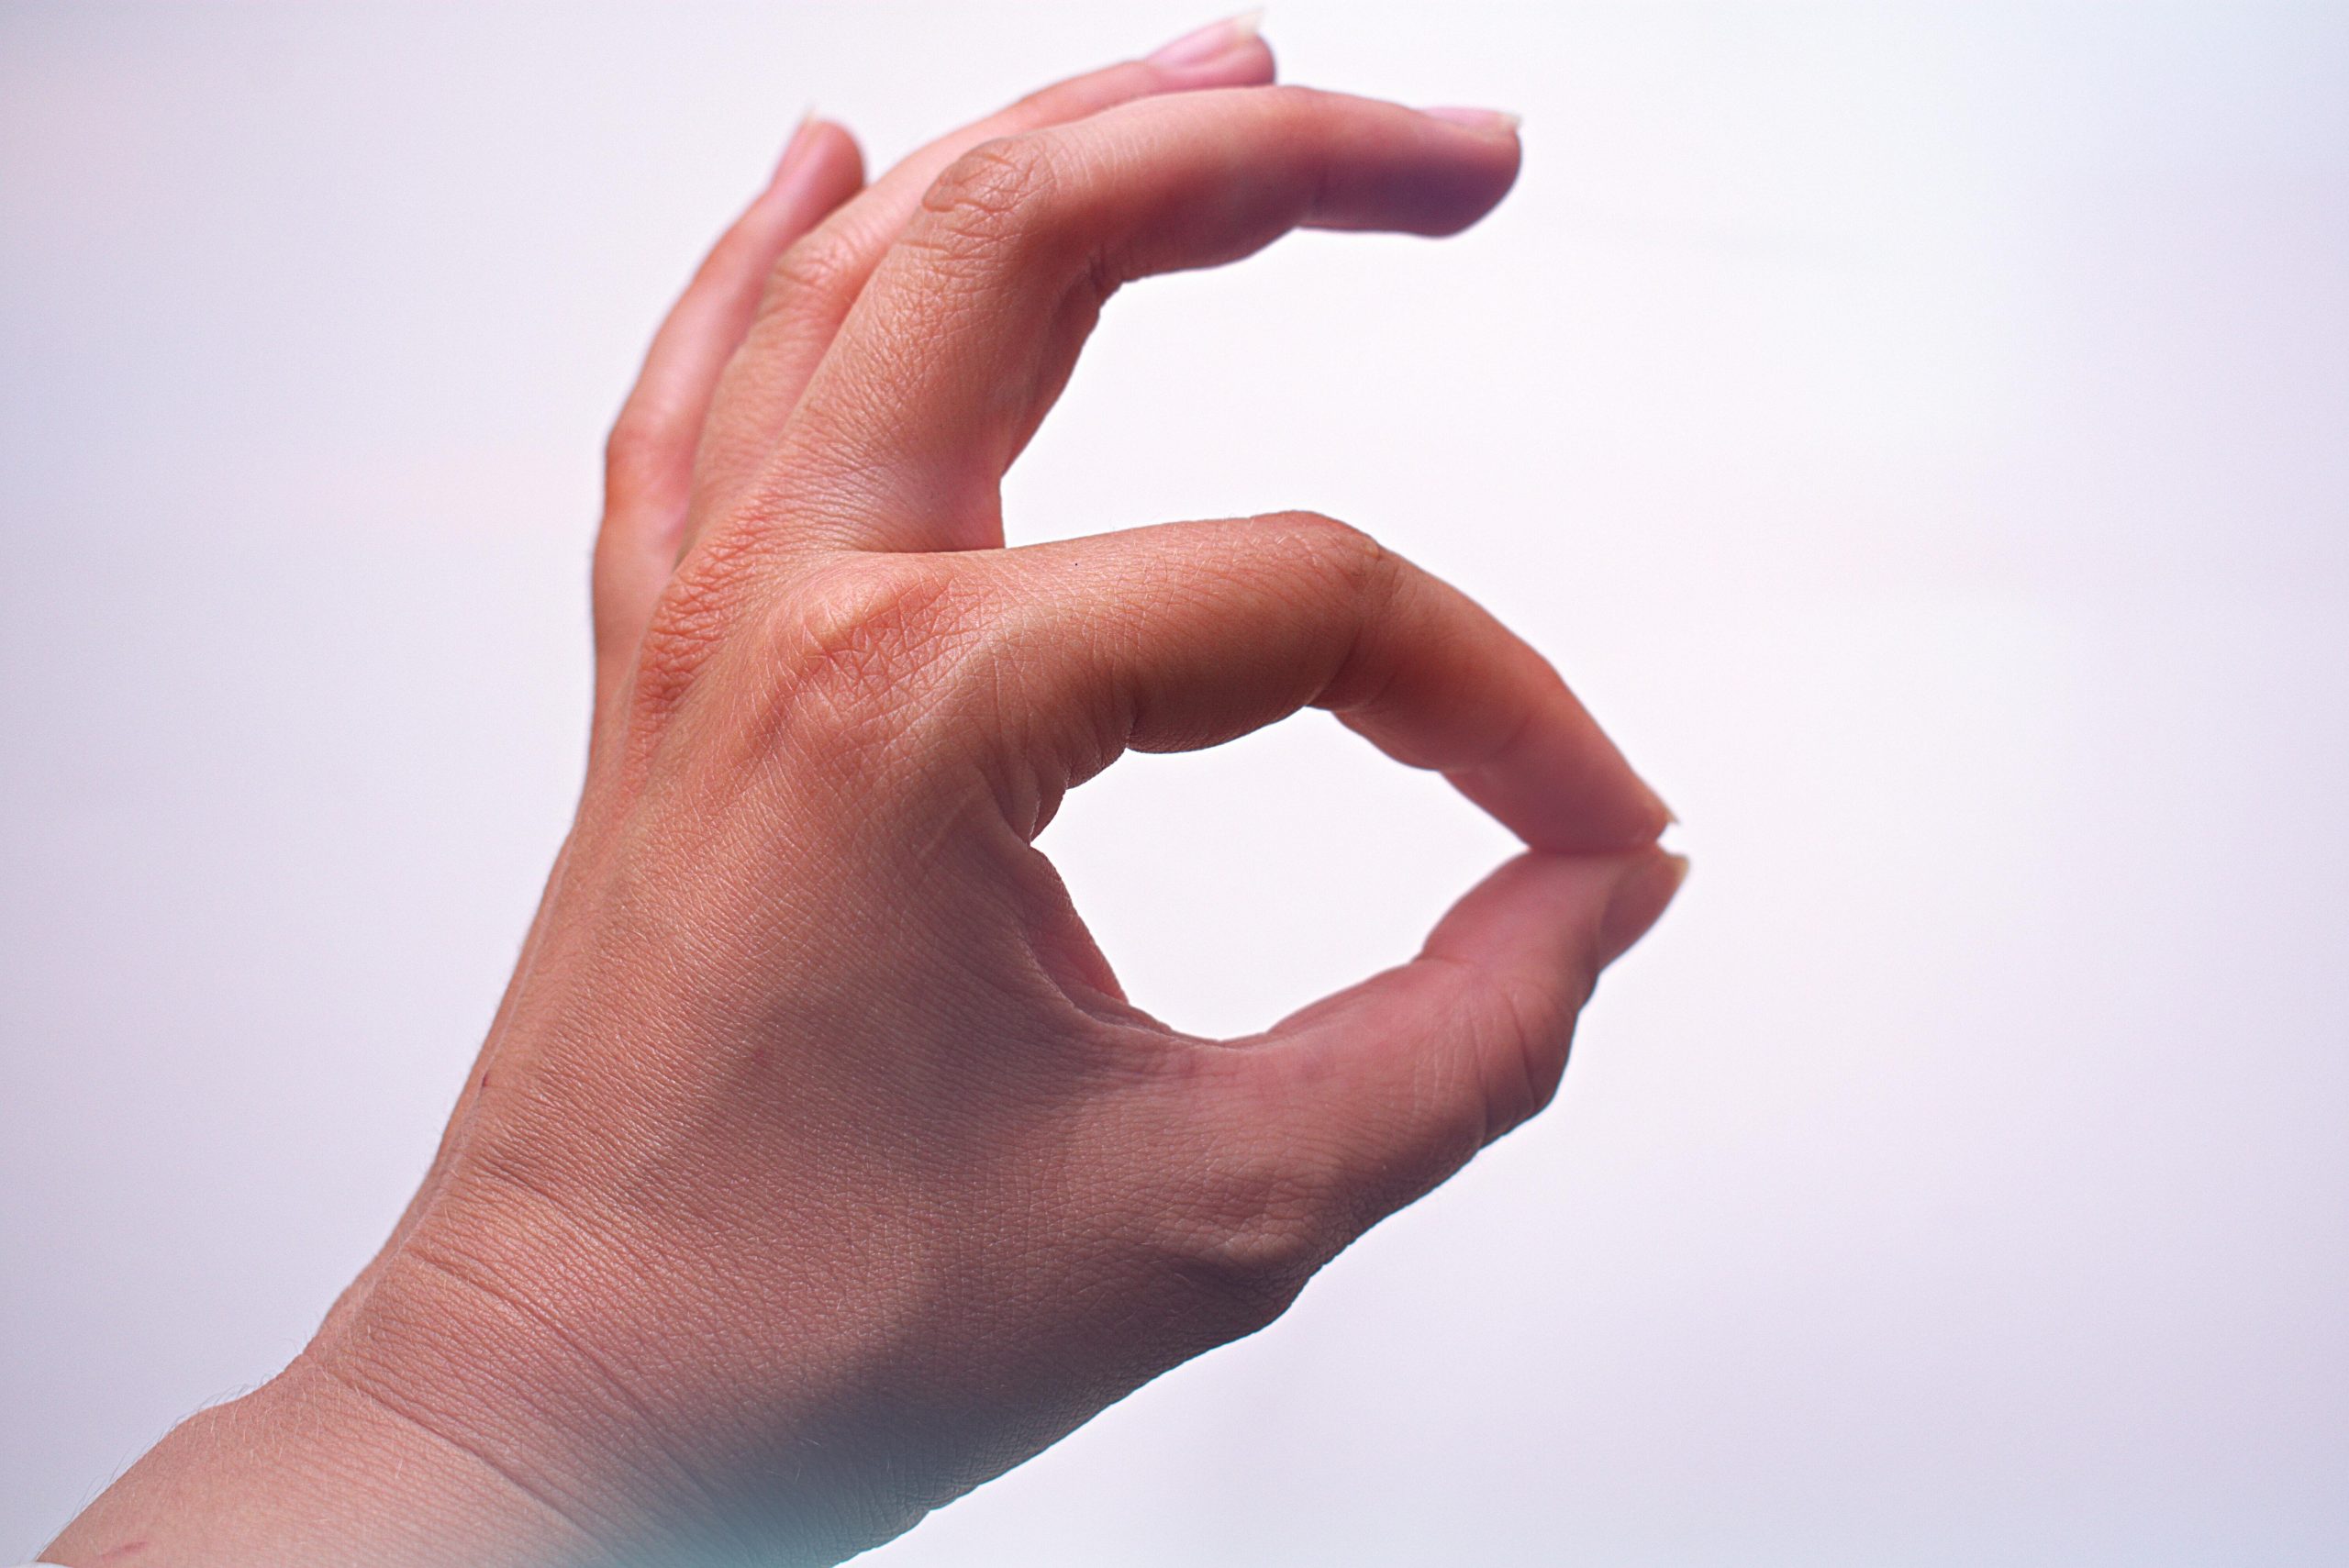 This beginner-friendly sign language course bundle is on sale for 94% off